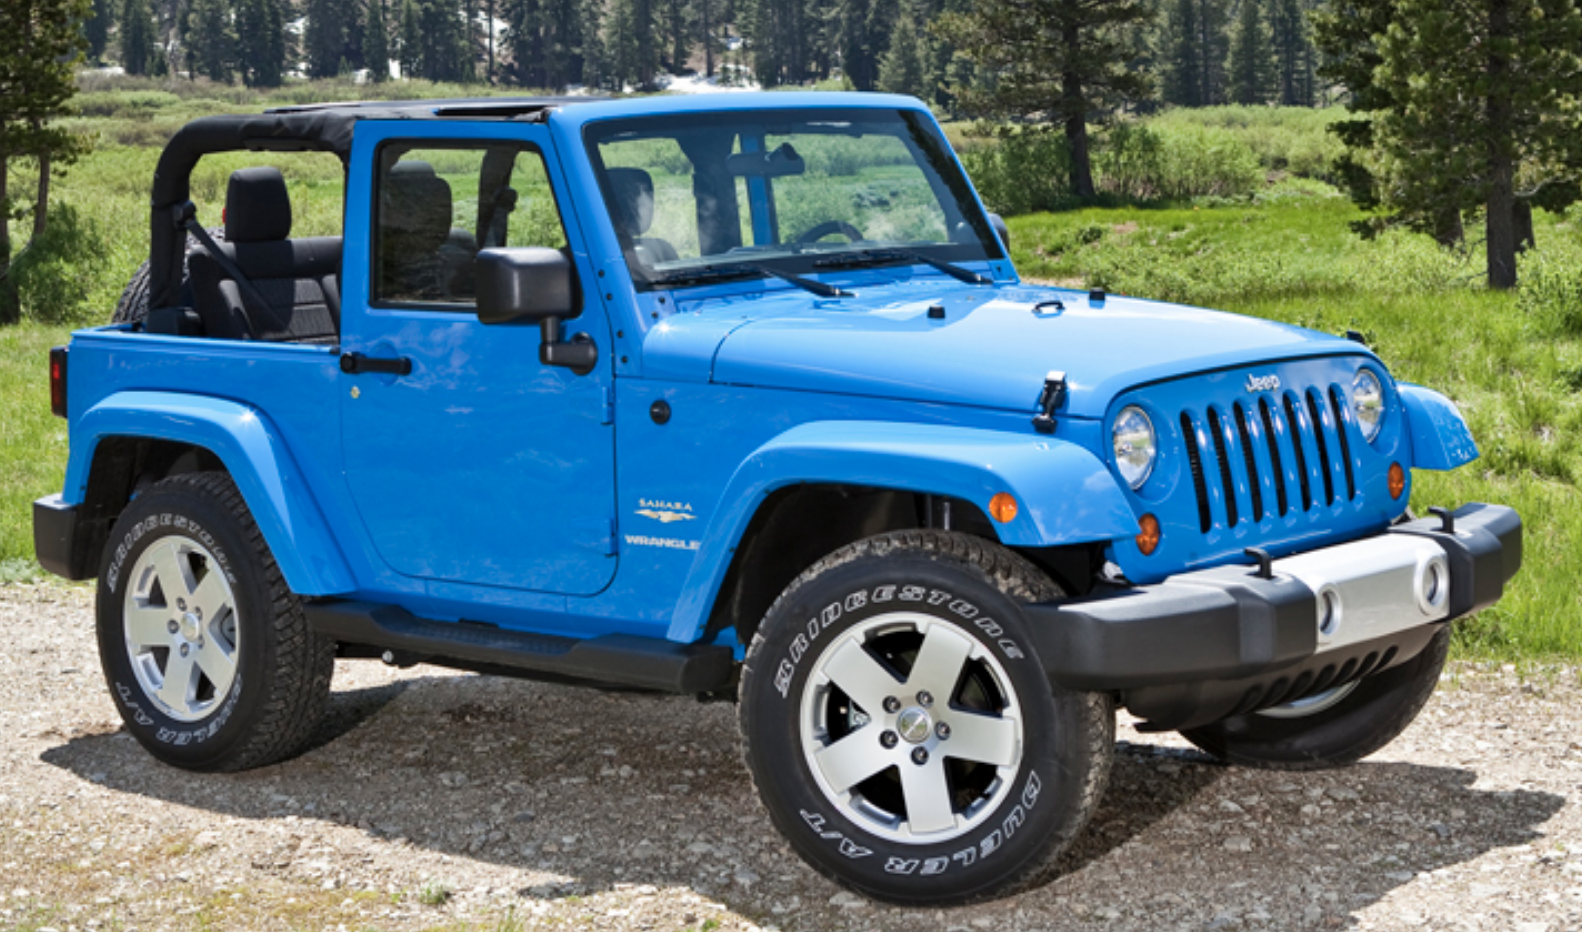 Quick Look: 2013 Jeep Wranger | The Daily Drive | Consumer Guide® The 2013 Jeep Wrangler 2 Door Towing Capacity